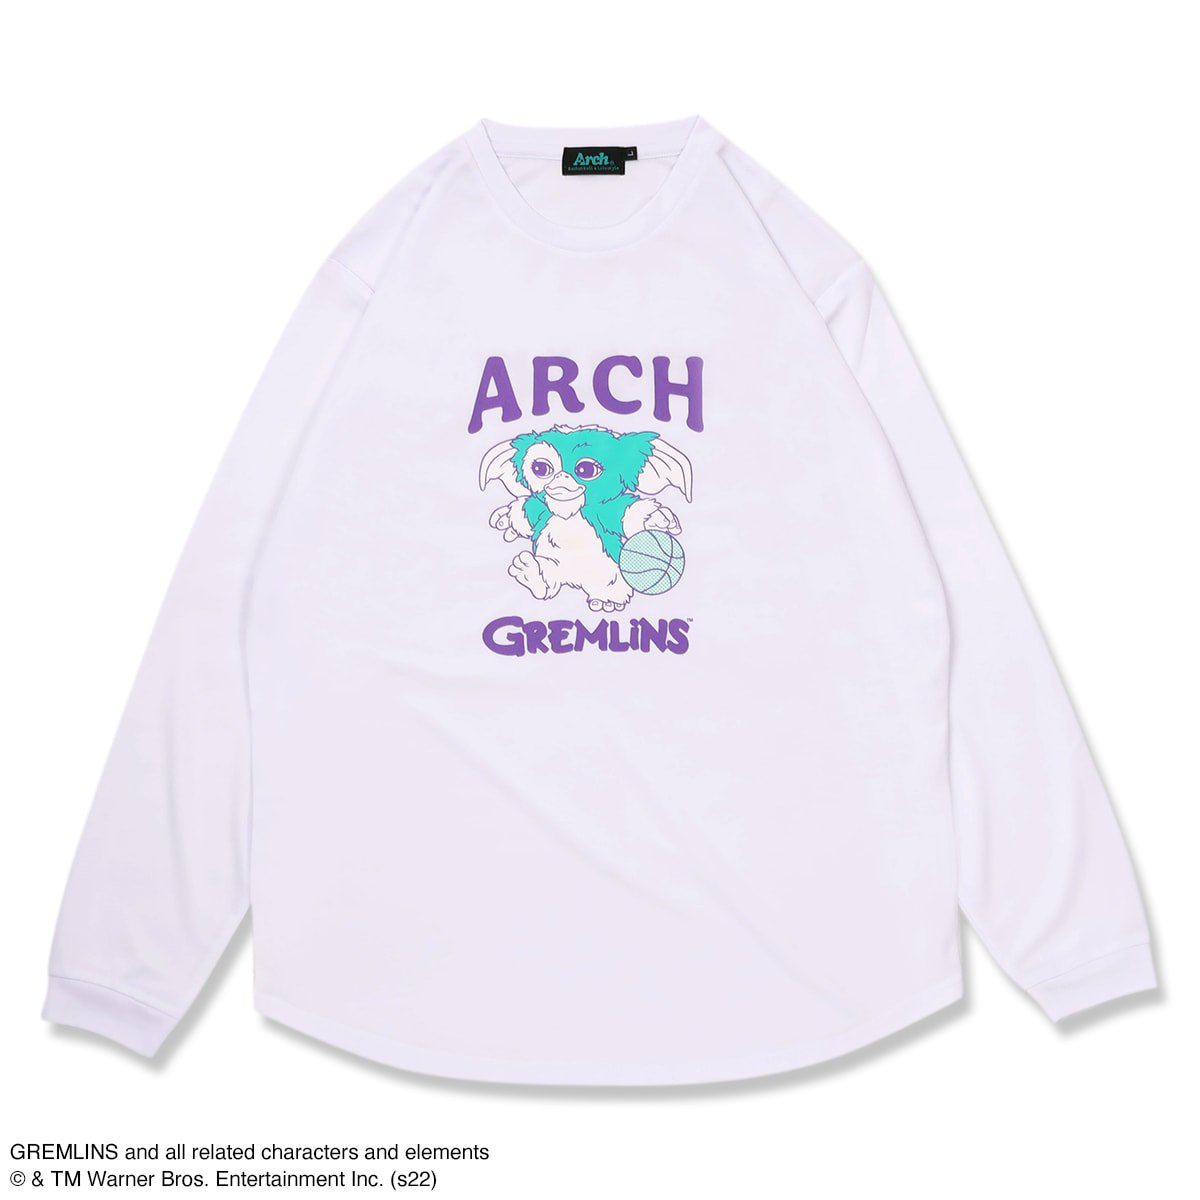 GREMLINS | Arch naughty L/S tee [DRY]【white】 - Arch ☆ アーチ  [バスケットボール＆ライフスタイルウェア Basketball&Lifestyle wear]